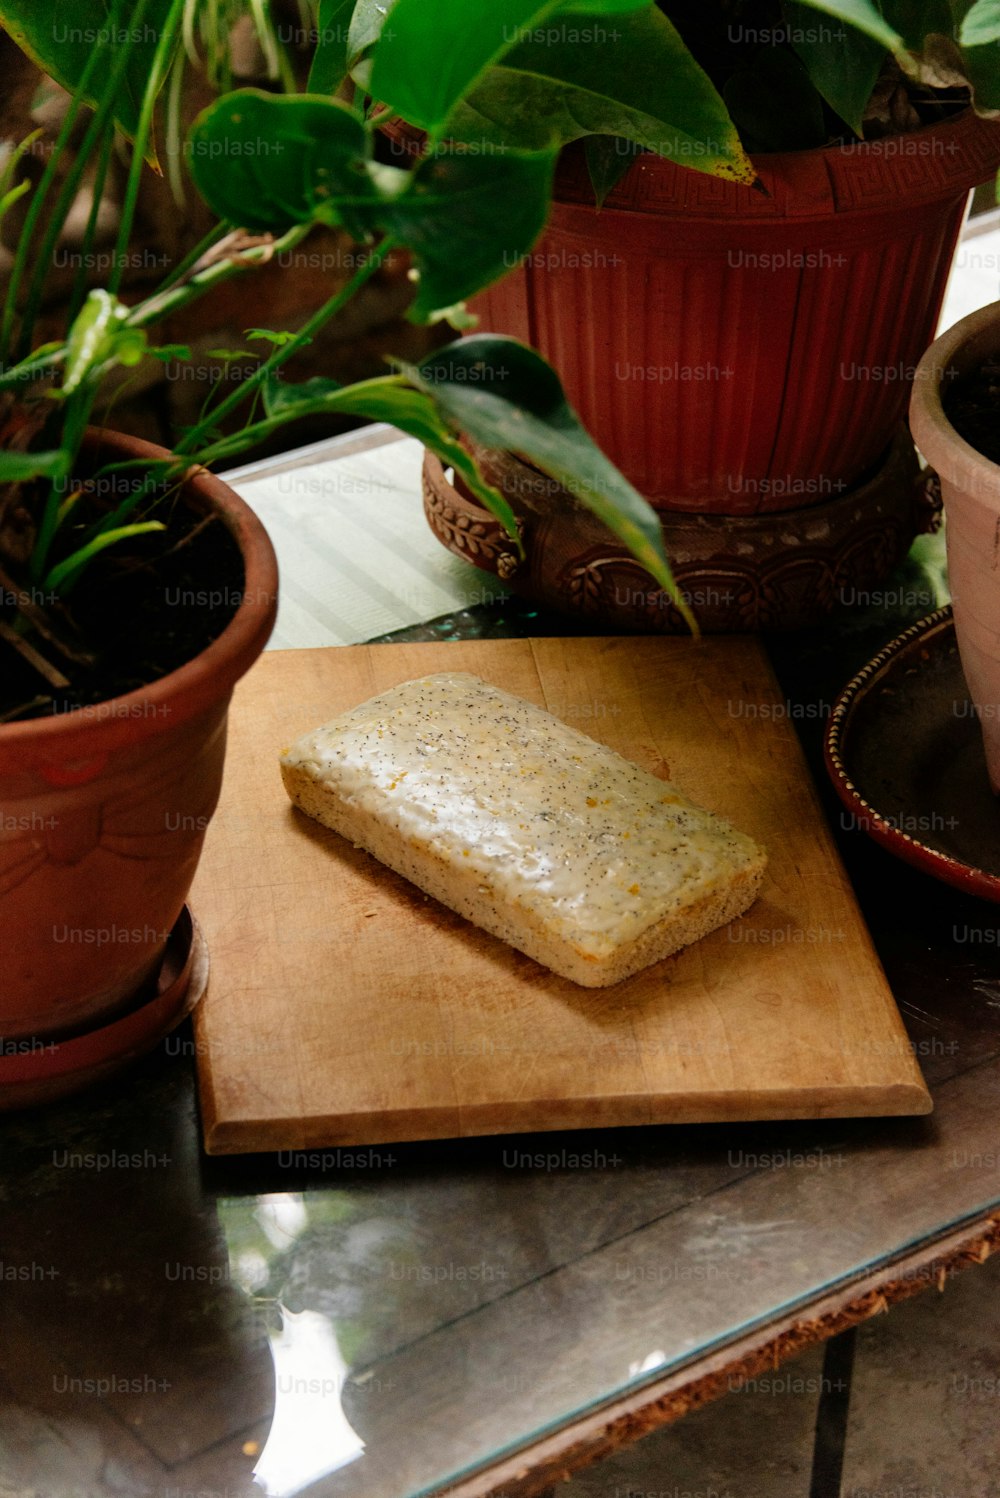 a loaf of bread on a cutting board next to potted plants